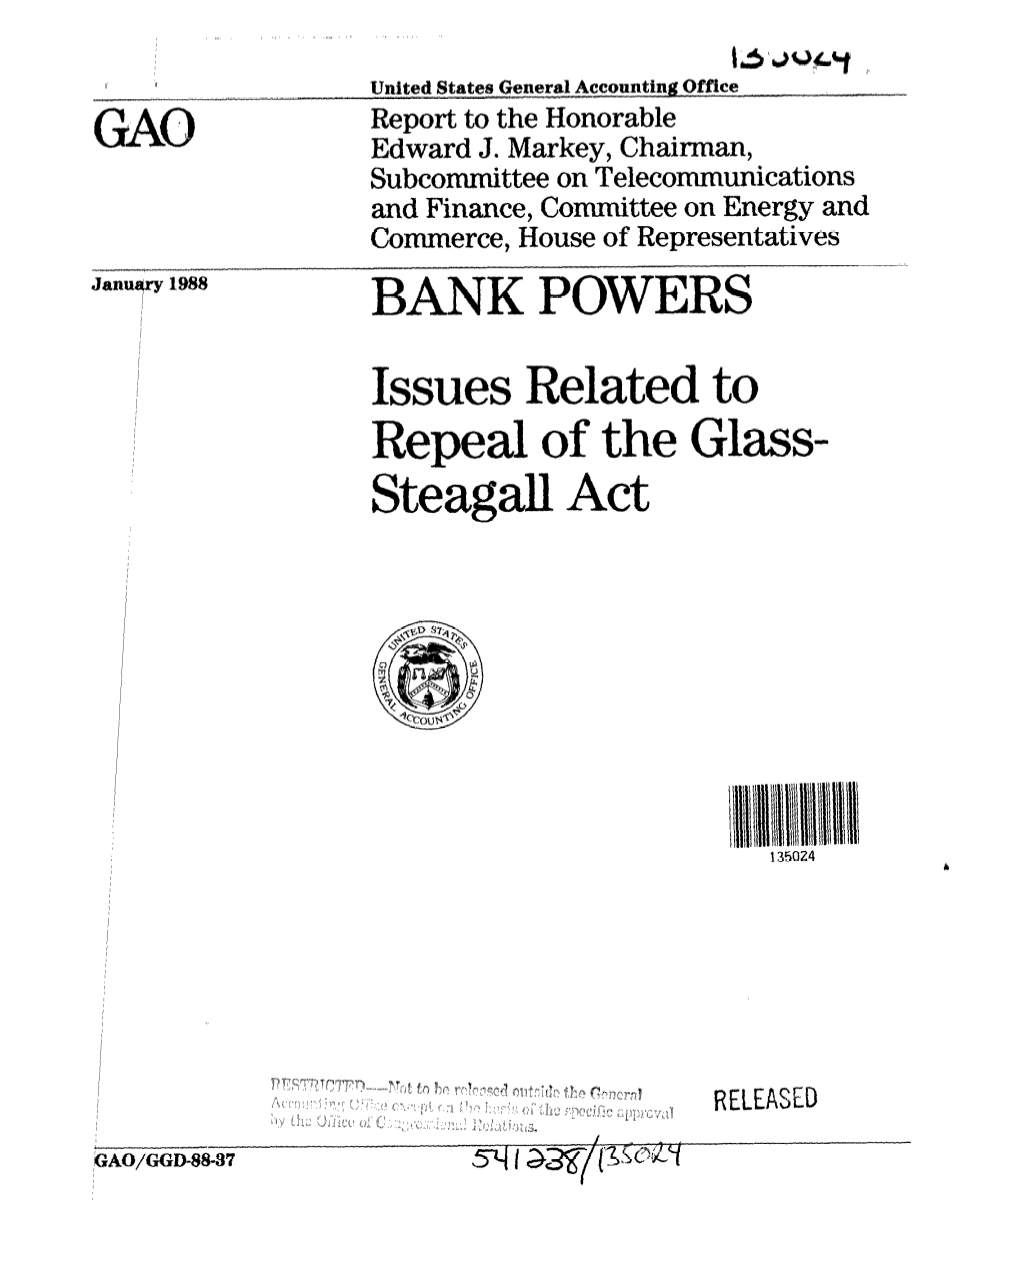 Bank Powers: Issues Related to Repeal of the Glass-Steagall